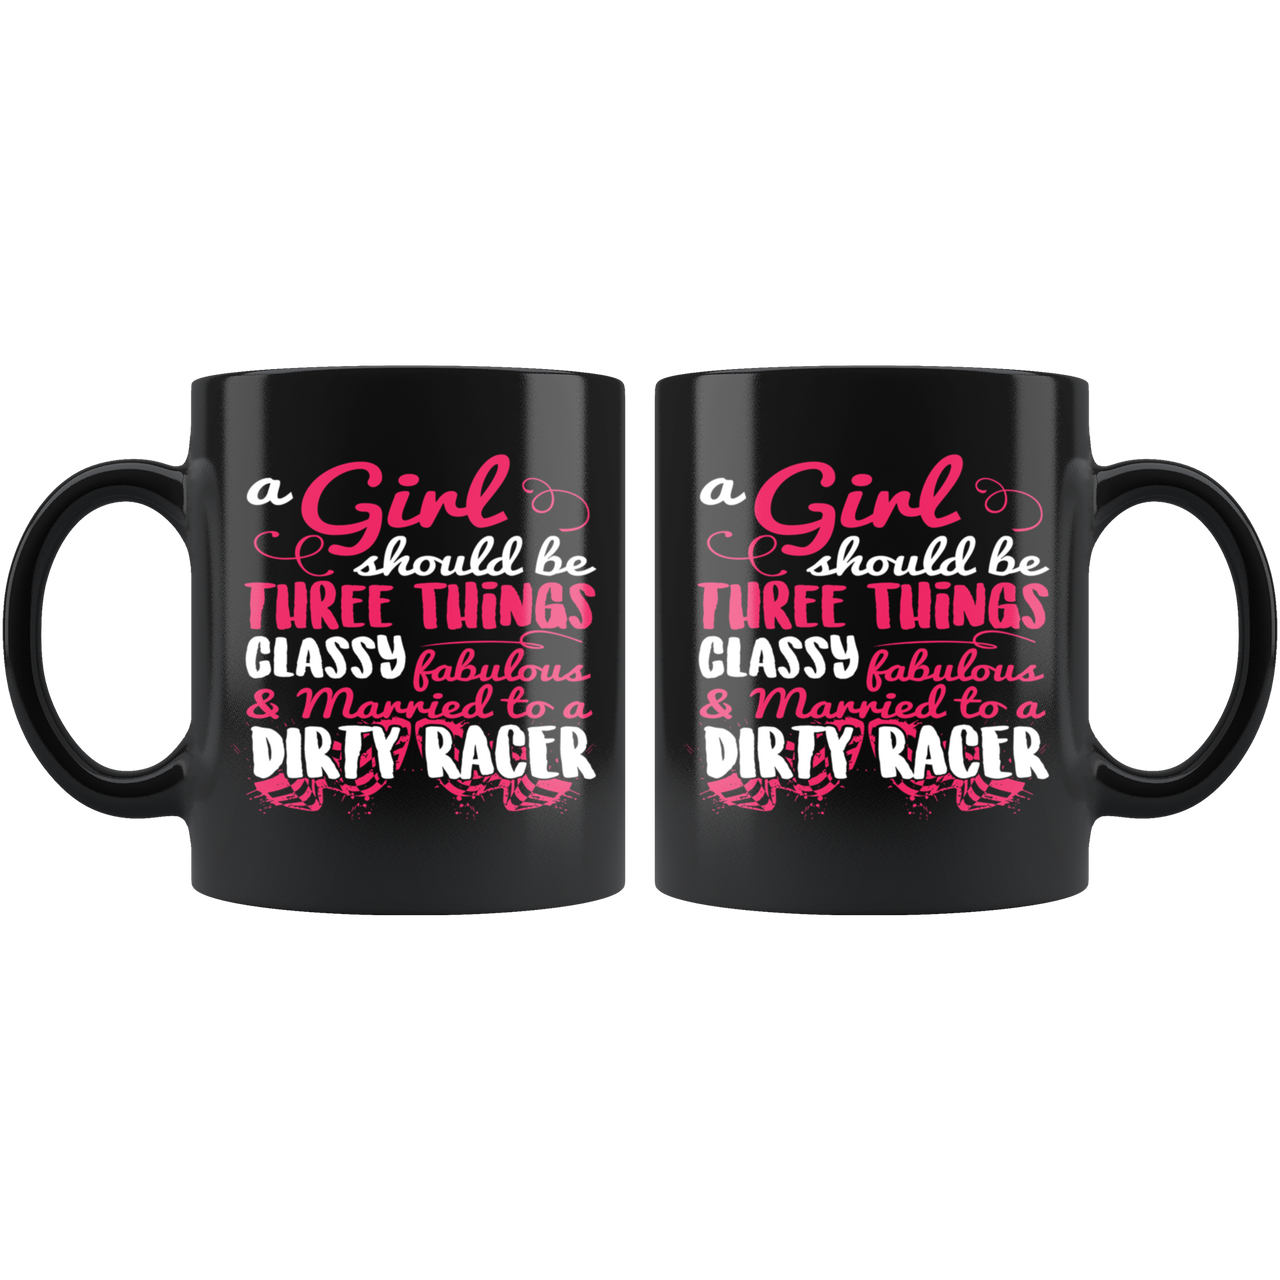 A Girl Should Be 3 Things Classy Fabulous And Married To A Dirty Racer Mug!